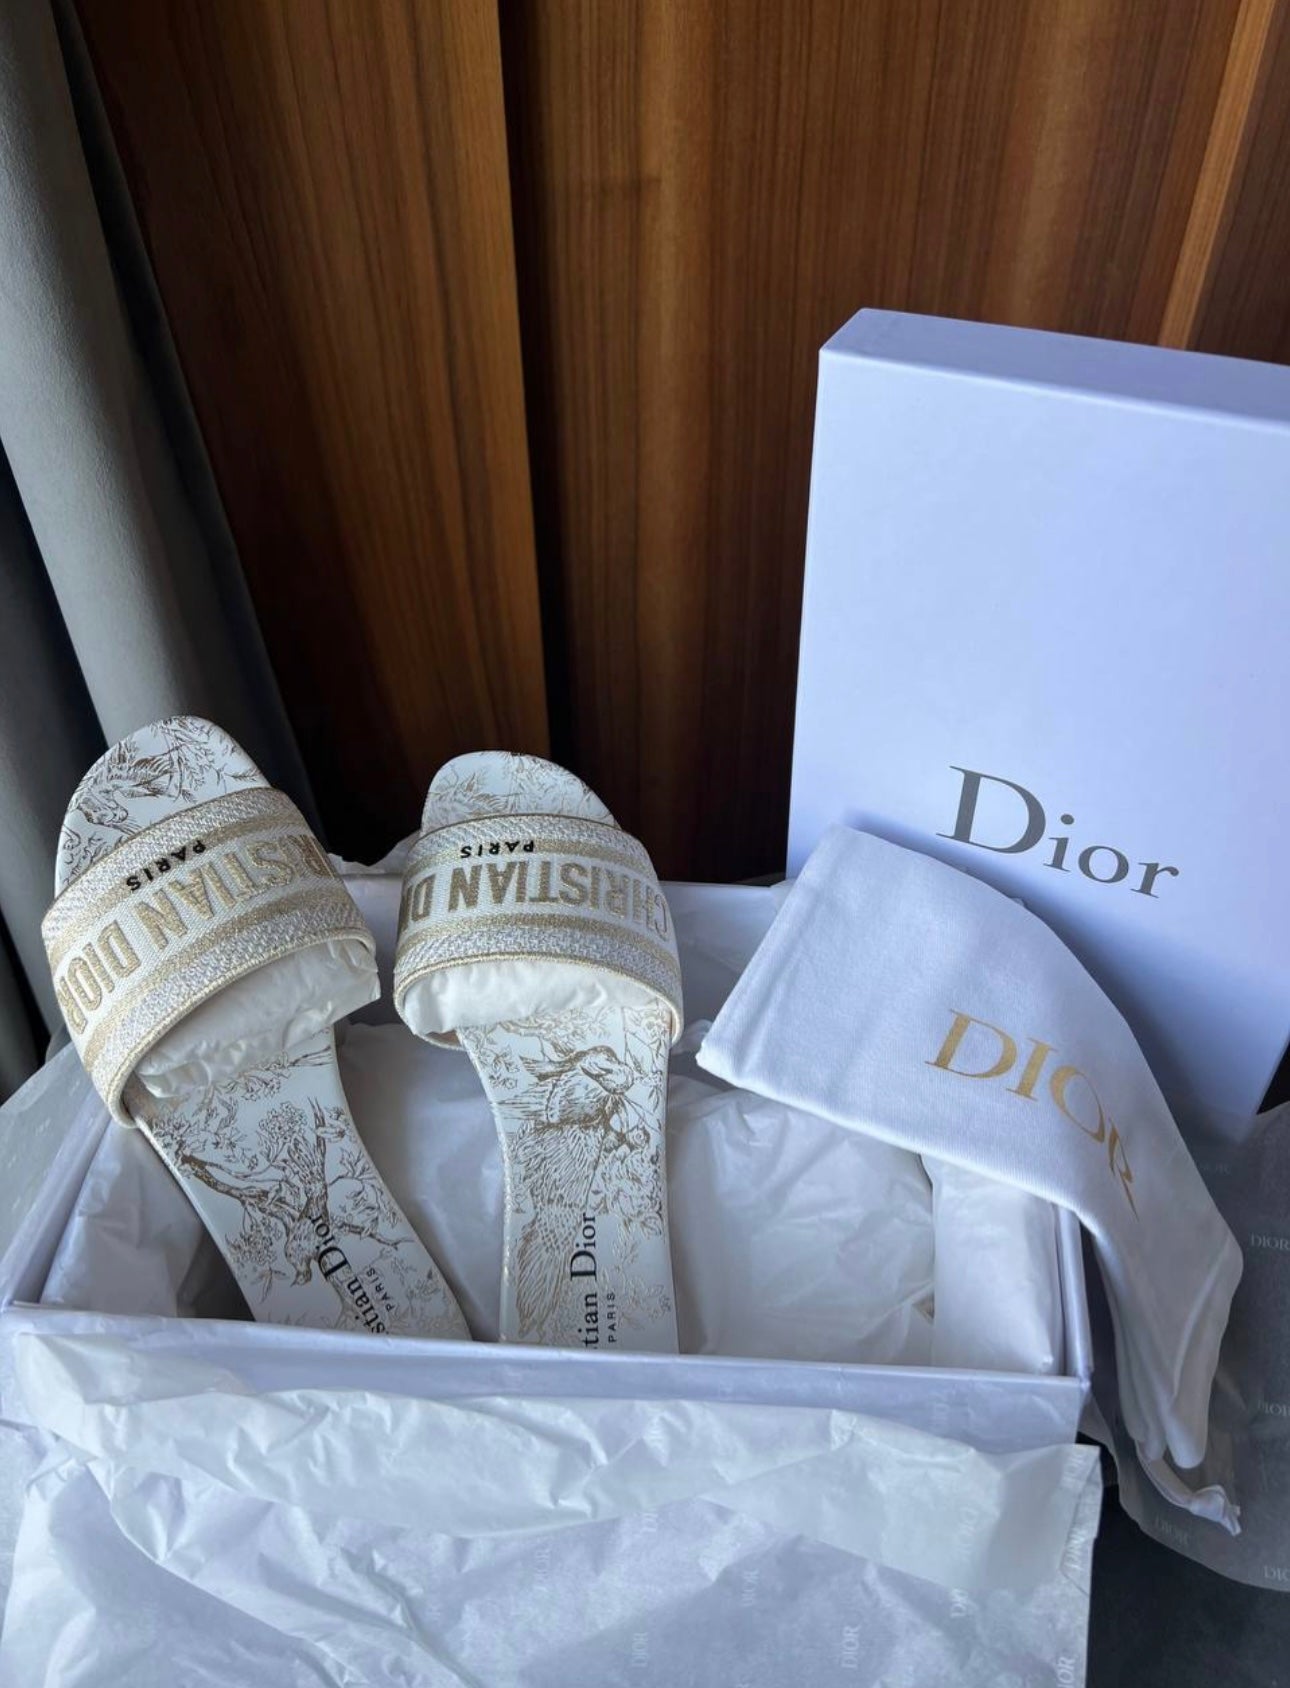 CHRISTIAN DIOR DWAY WHITE GOLD BEIGE FABRIC SLIDES SANDALS SHOES 37.5